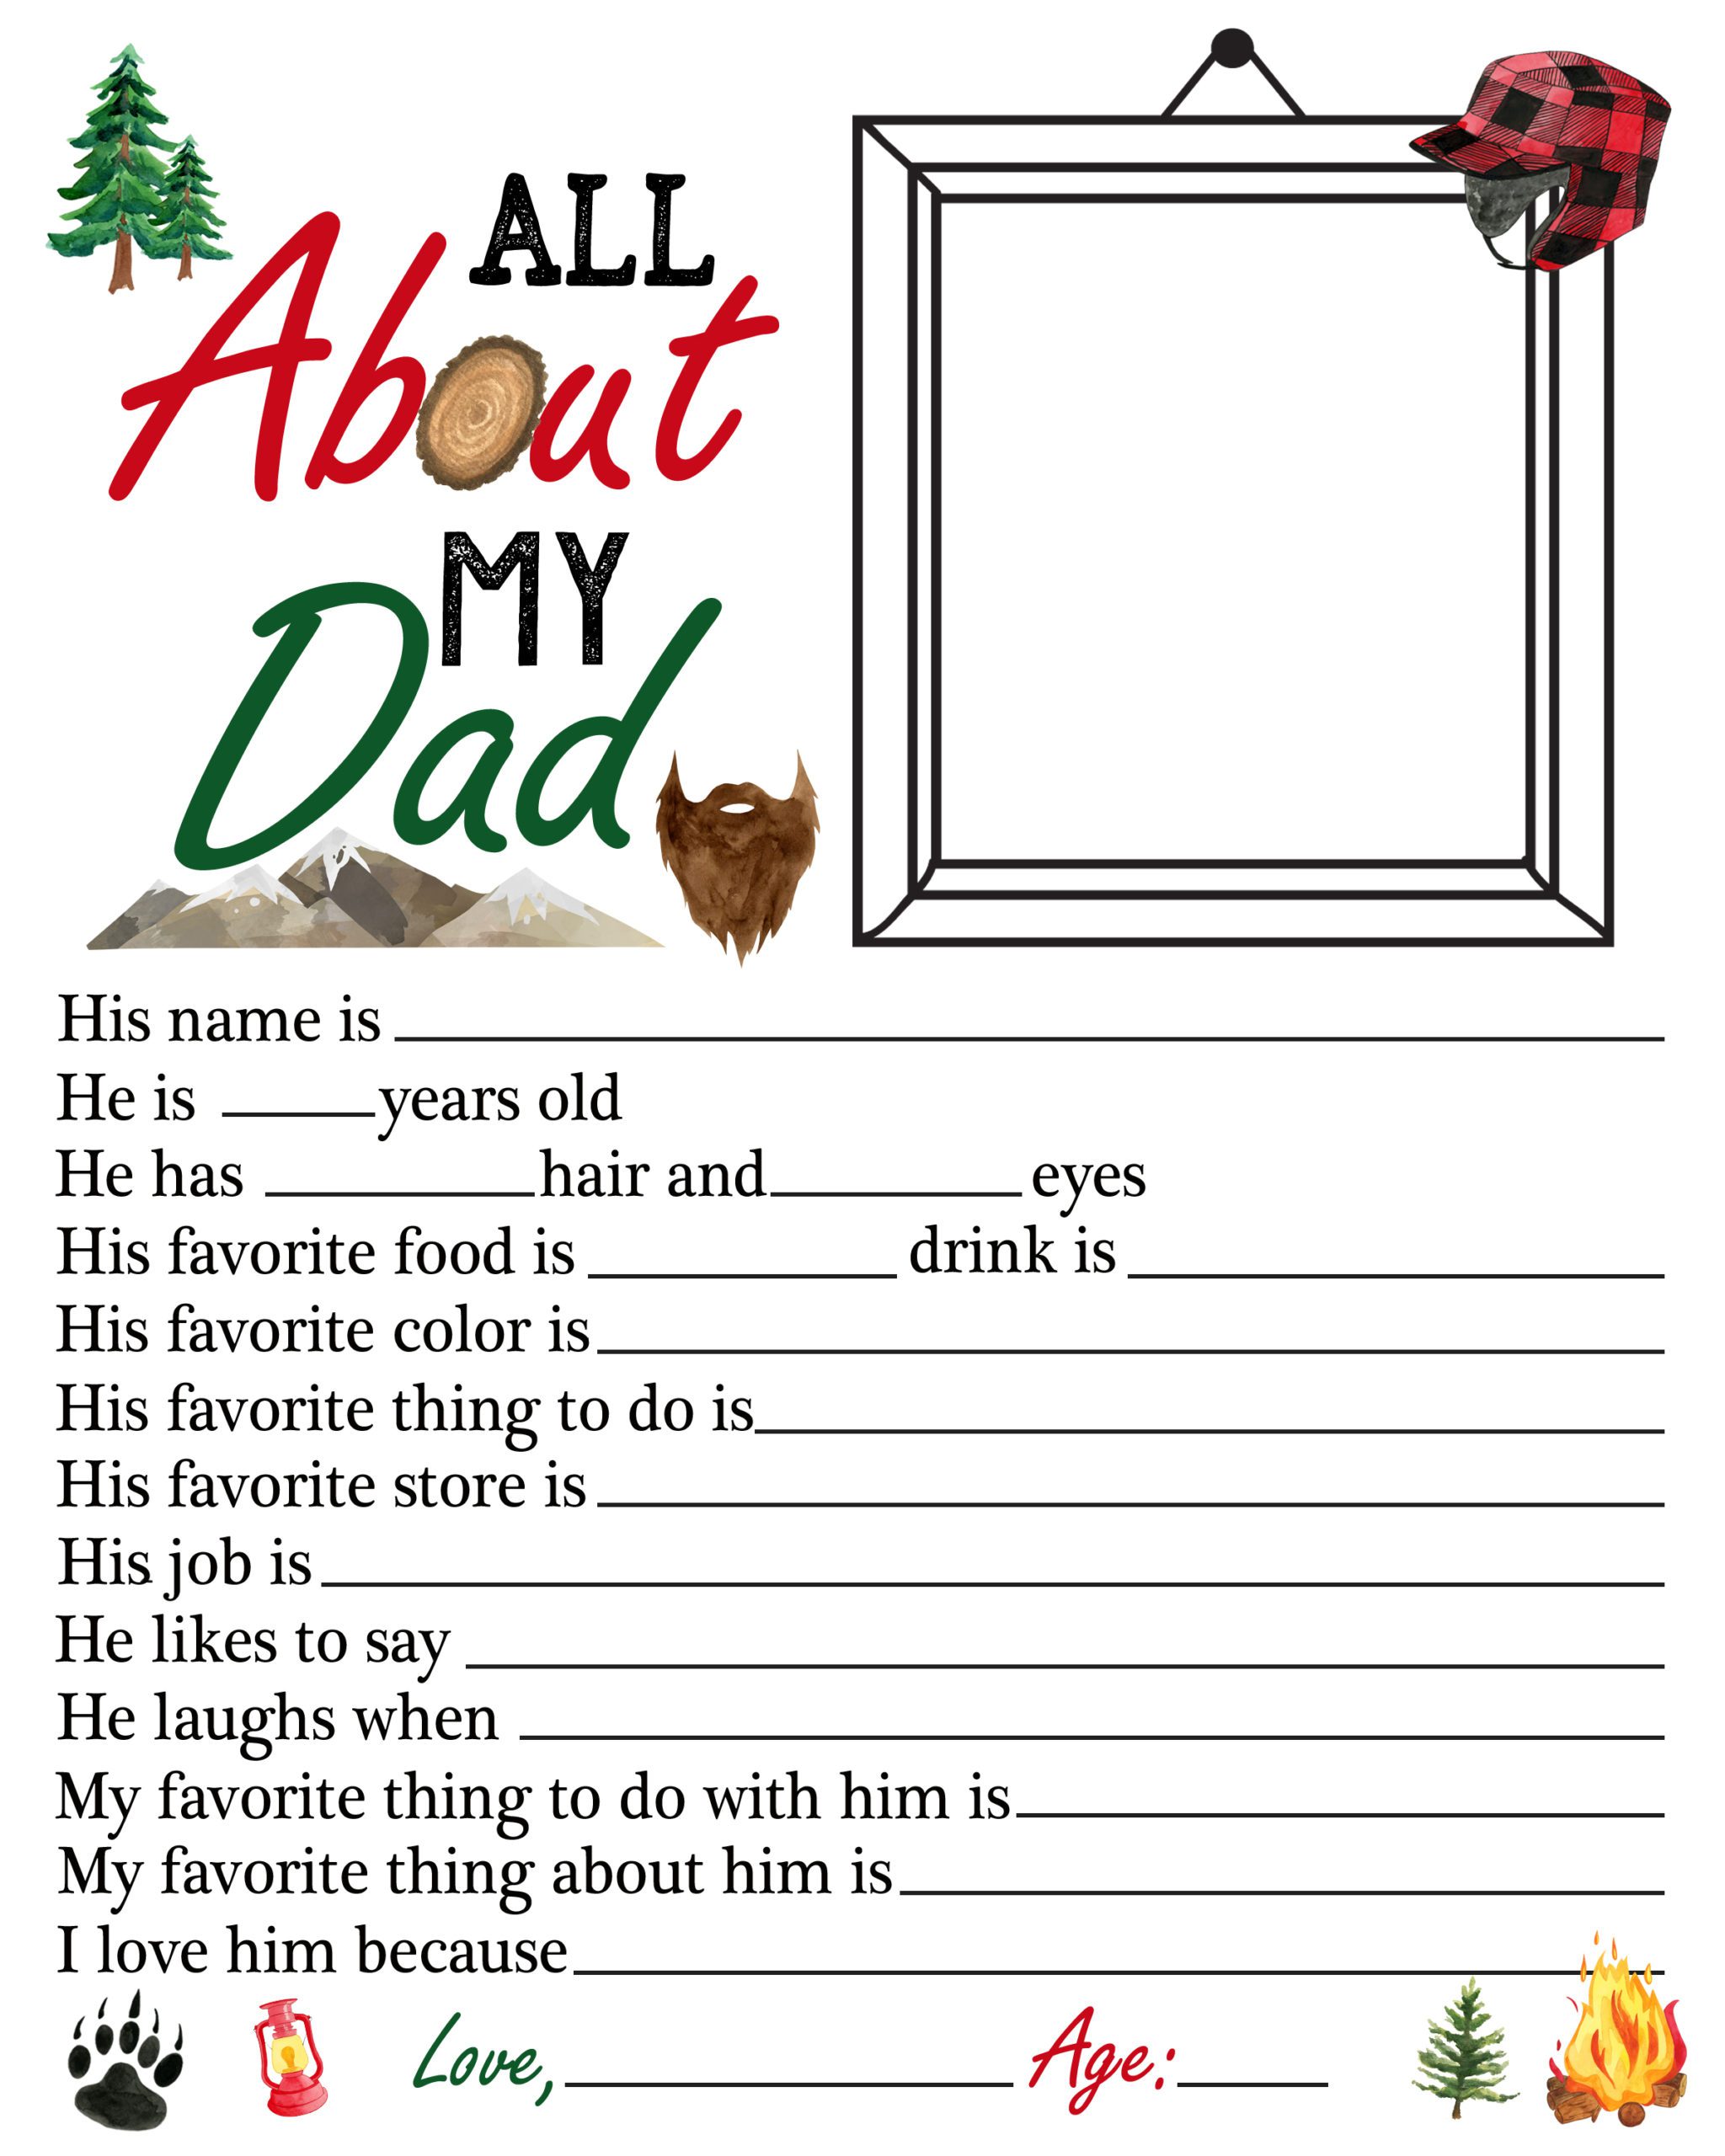 Father’s Day Gift Ideas + Free Printable